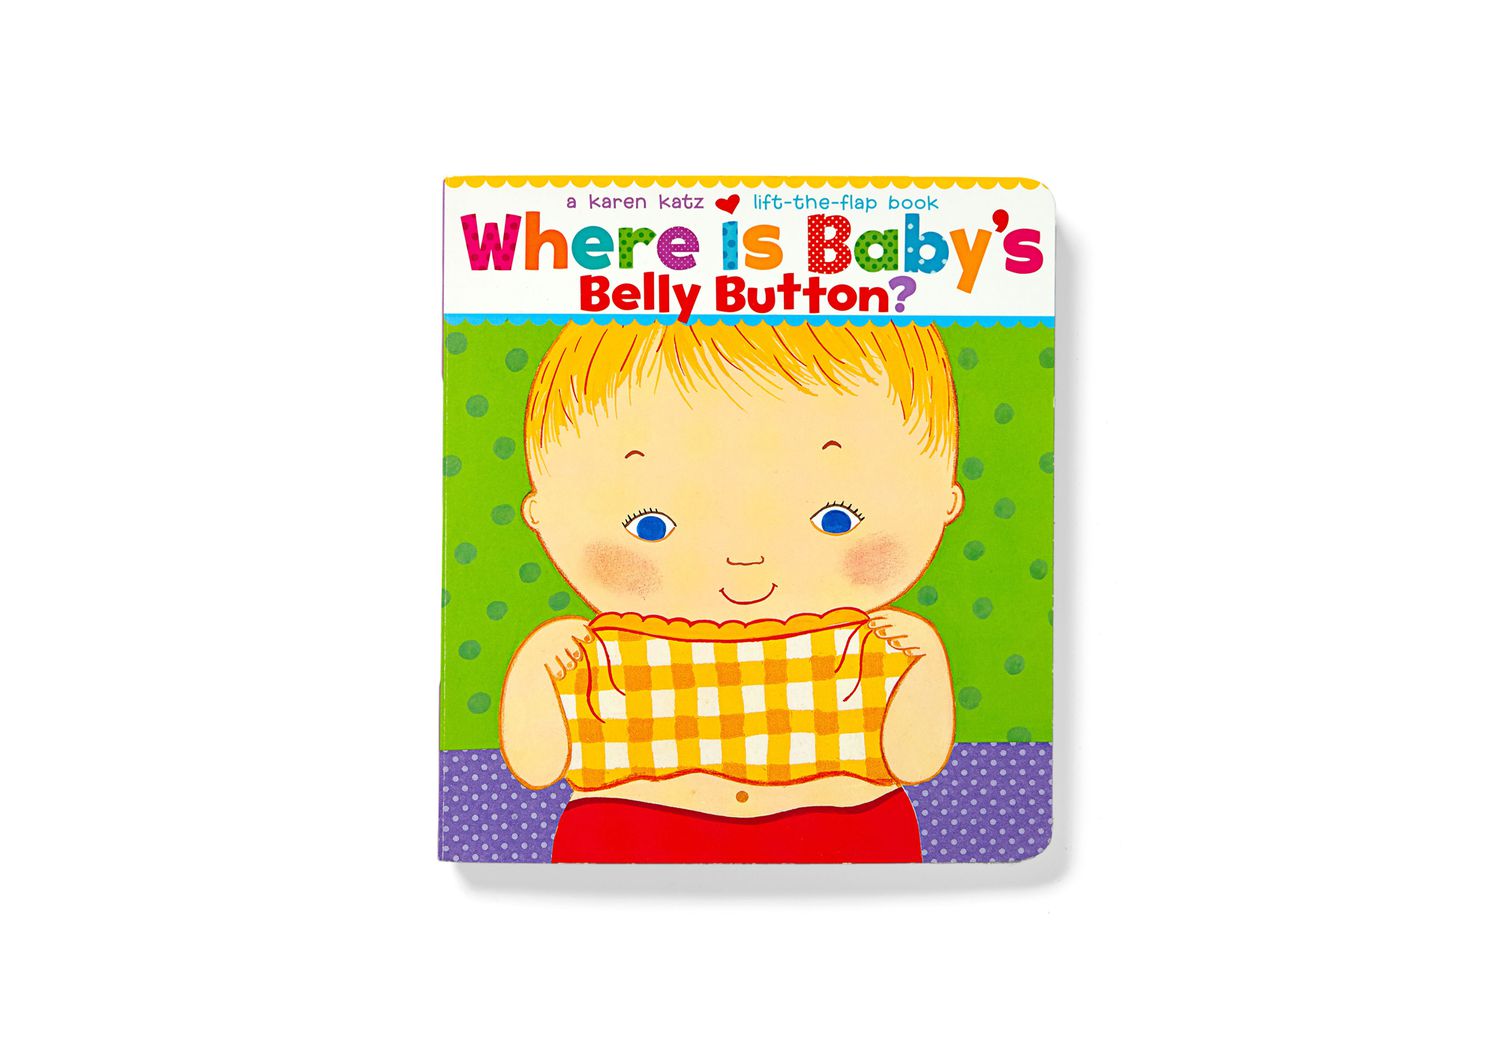 Where Is Baby's Belly Button? book cover